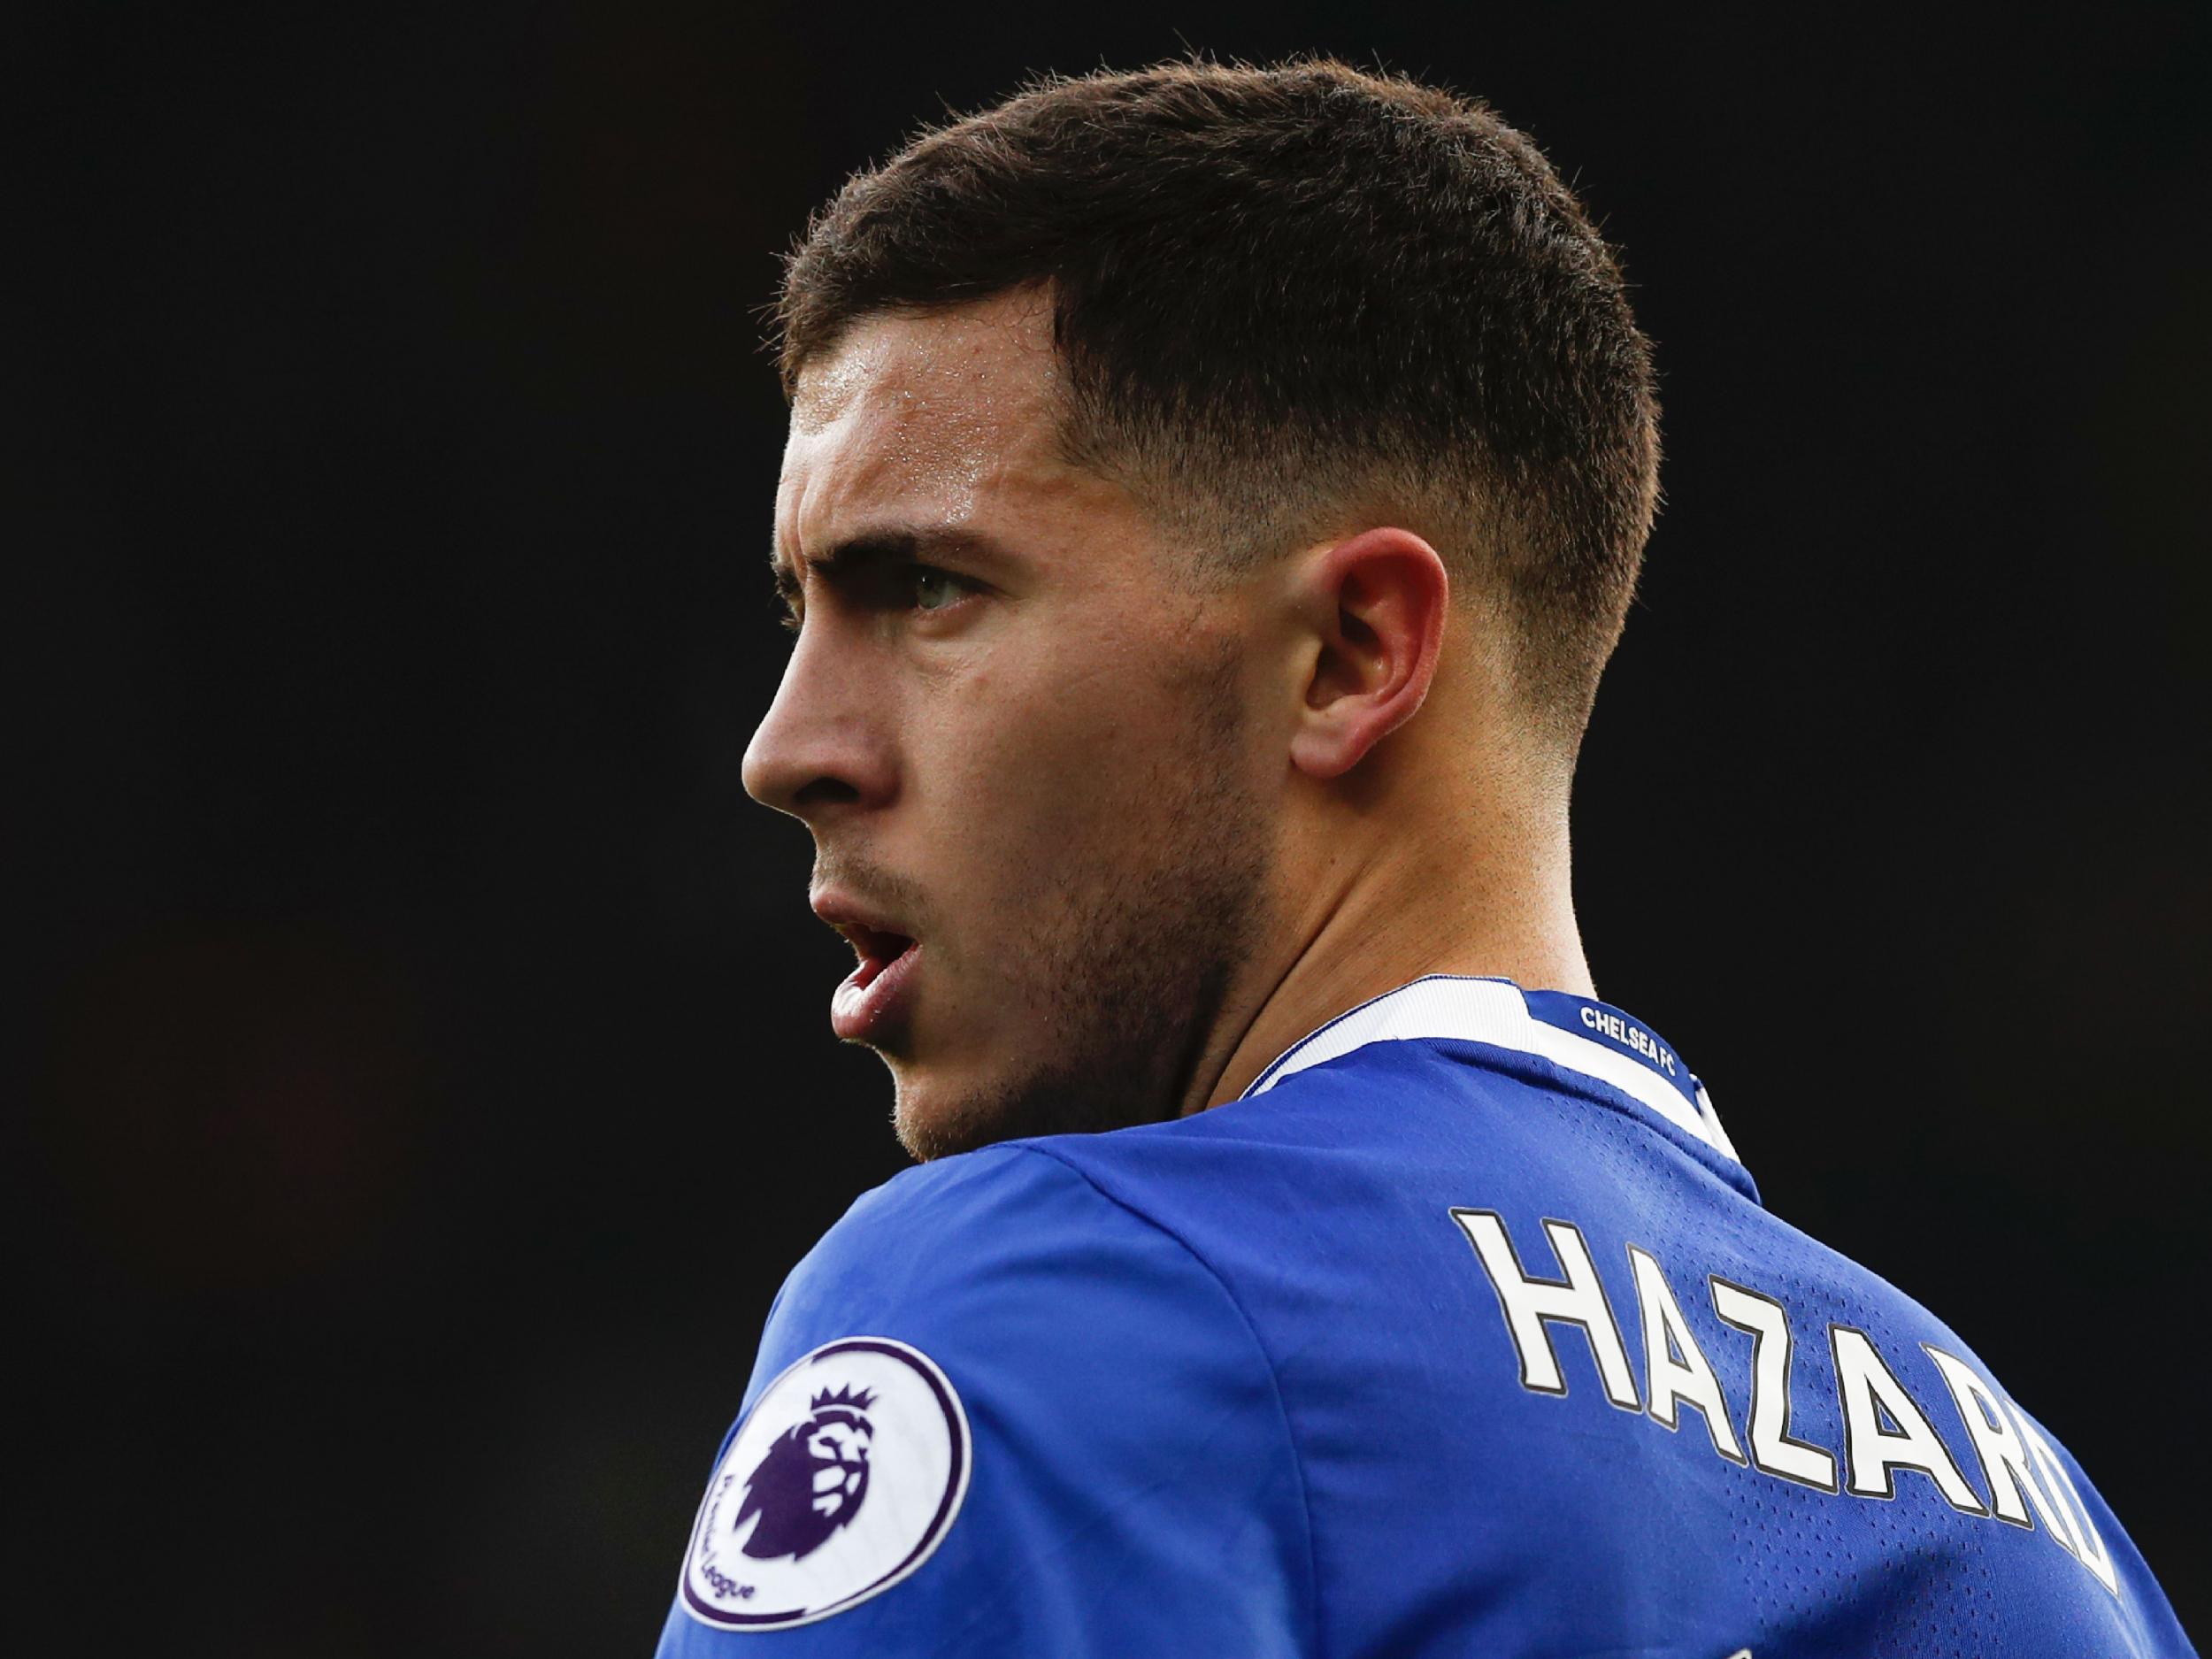 Hazard's goal exhibited strength, skill, pace and power in his goal